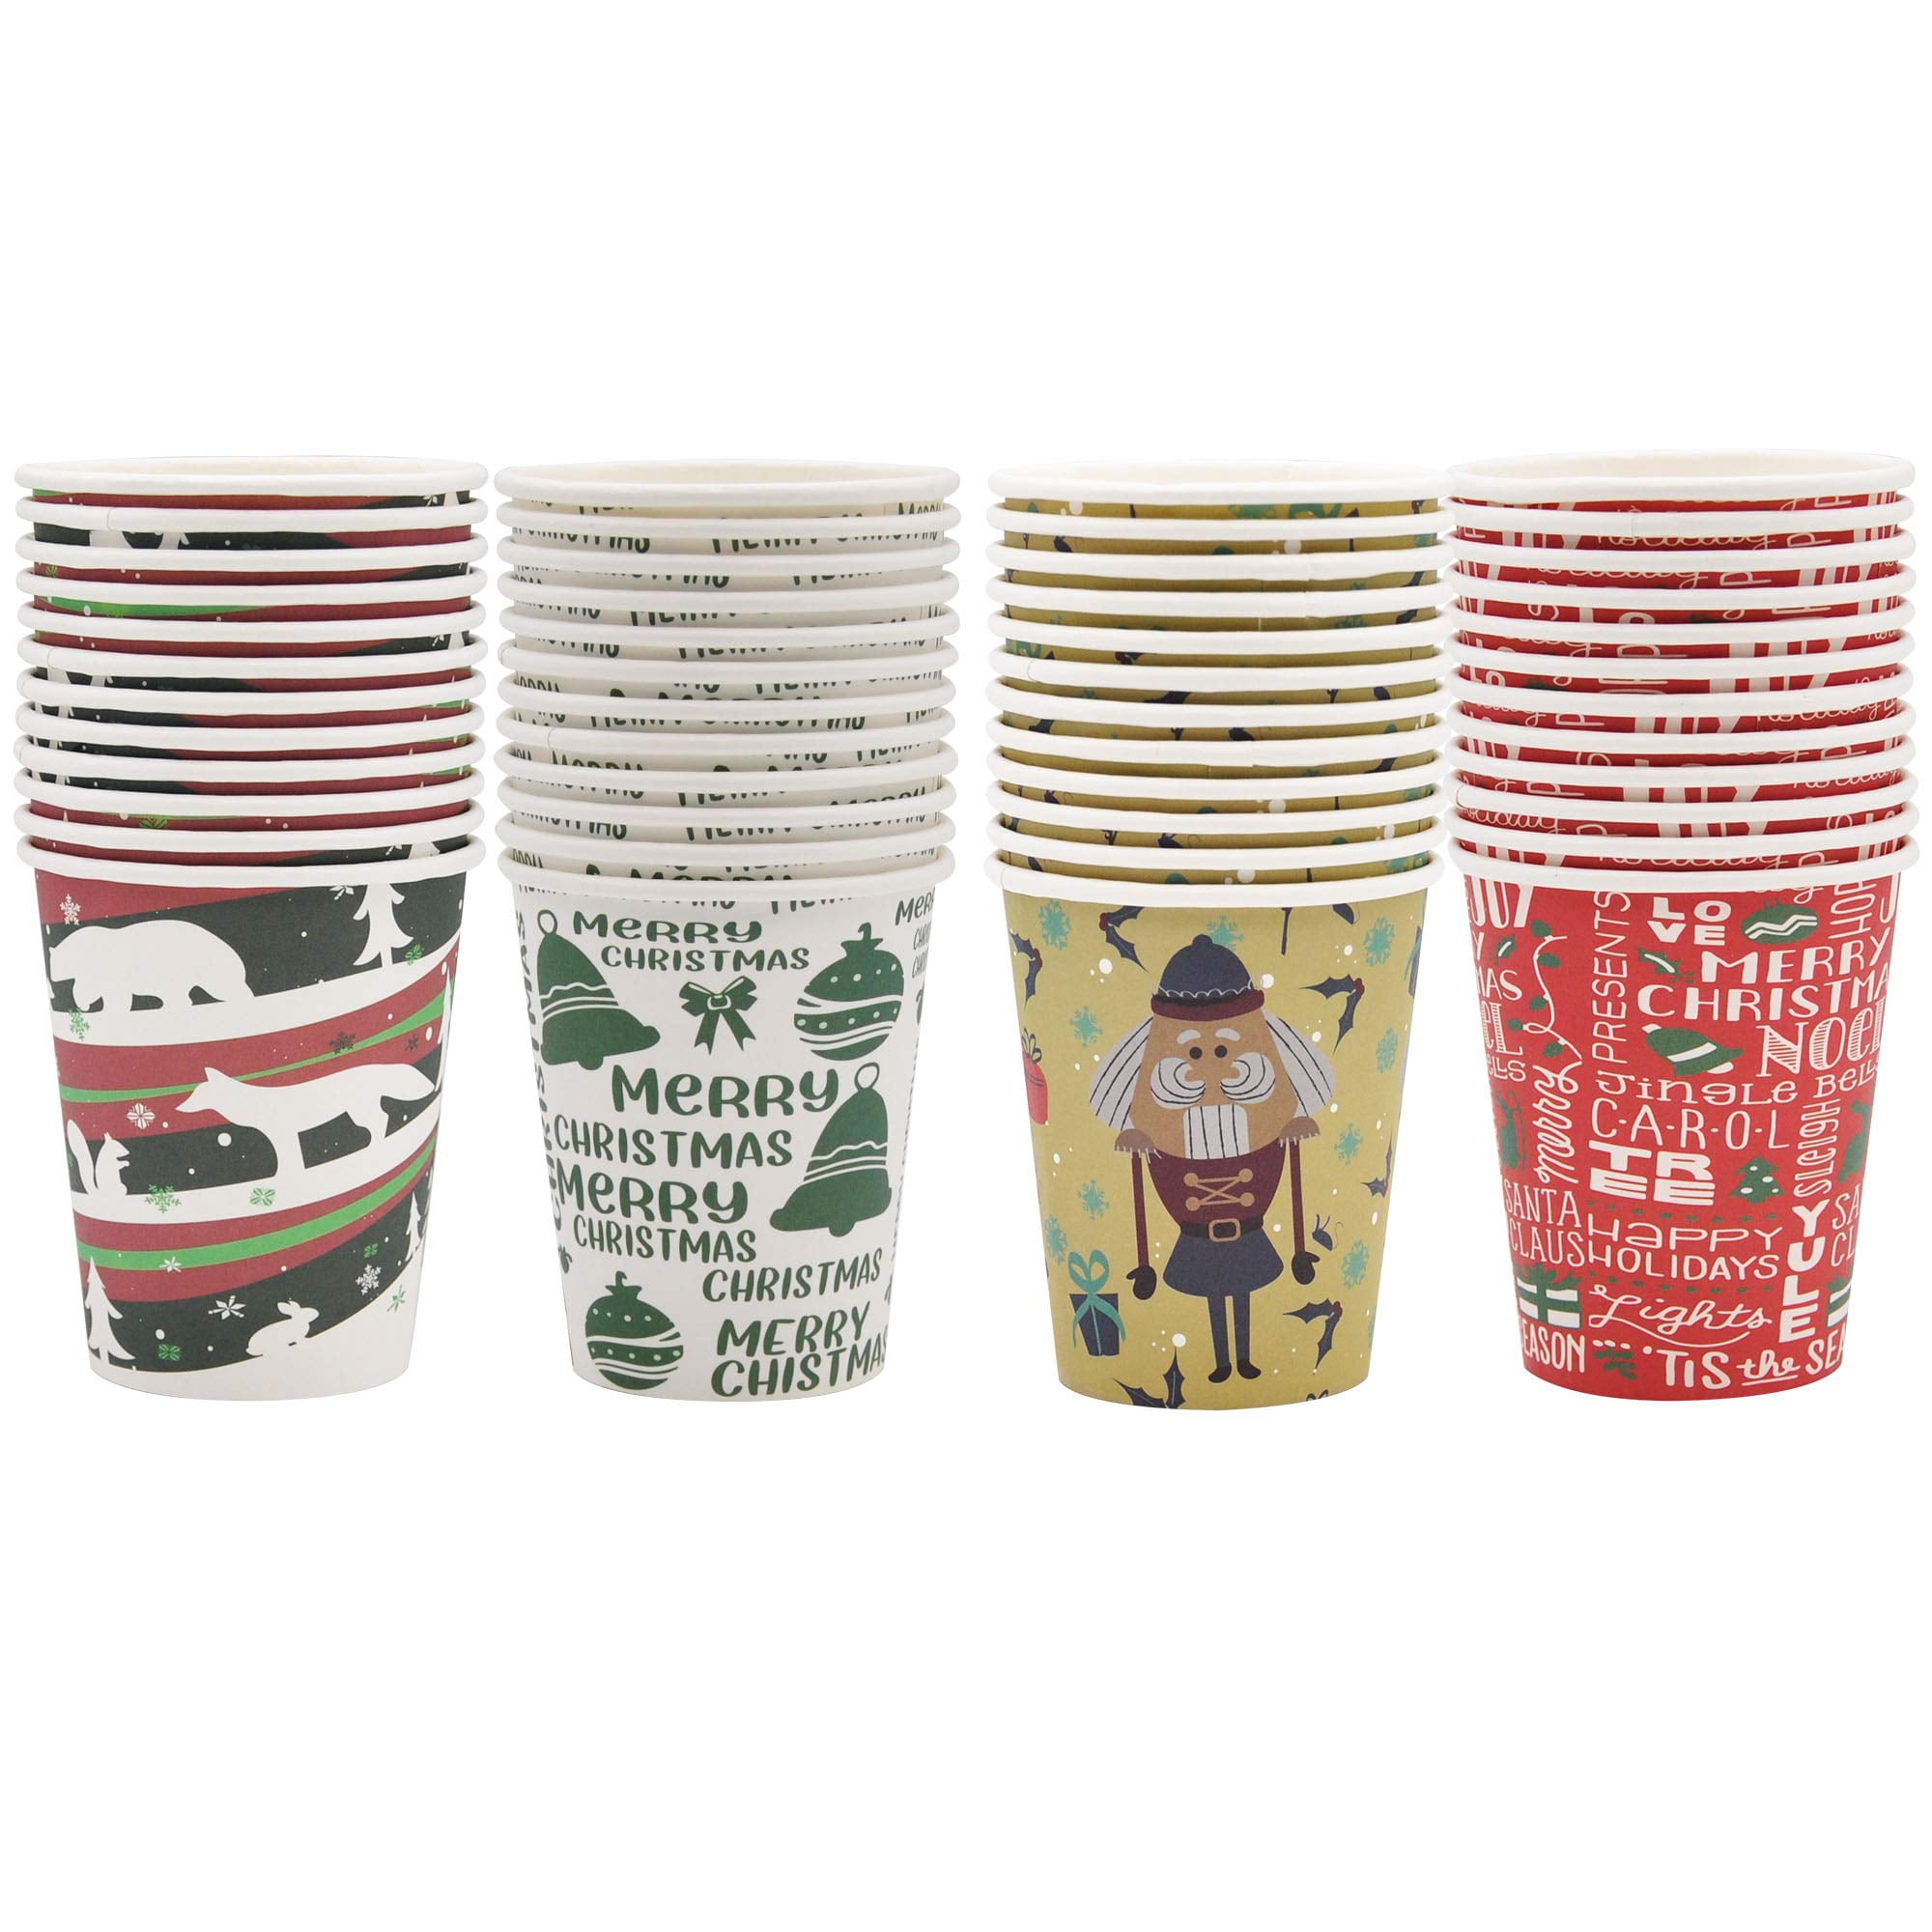 SparkSettings Disposable Paper Cups, 9 oz. Silver Paper Coffee Cups, Strong  and Sturdy Coffee Disposable Cups for Party, Wedding, Thanksgiving Day,  Christmas, Halloween Hot Cups, Pack of 51 